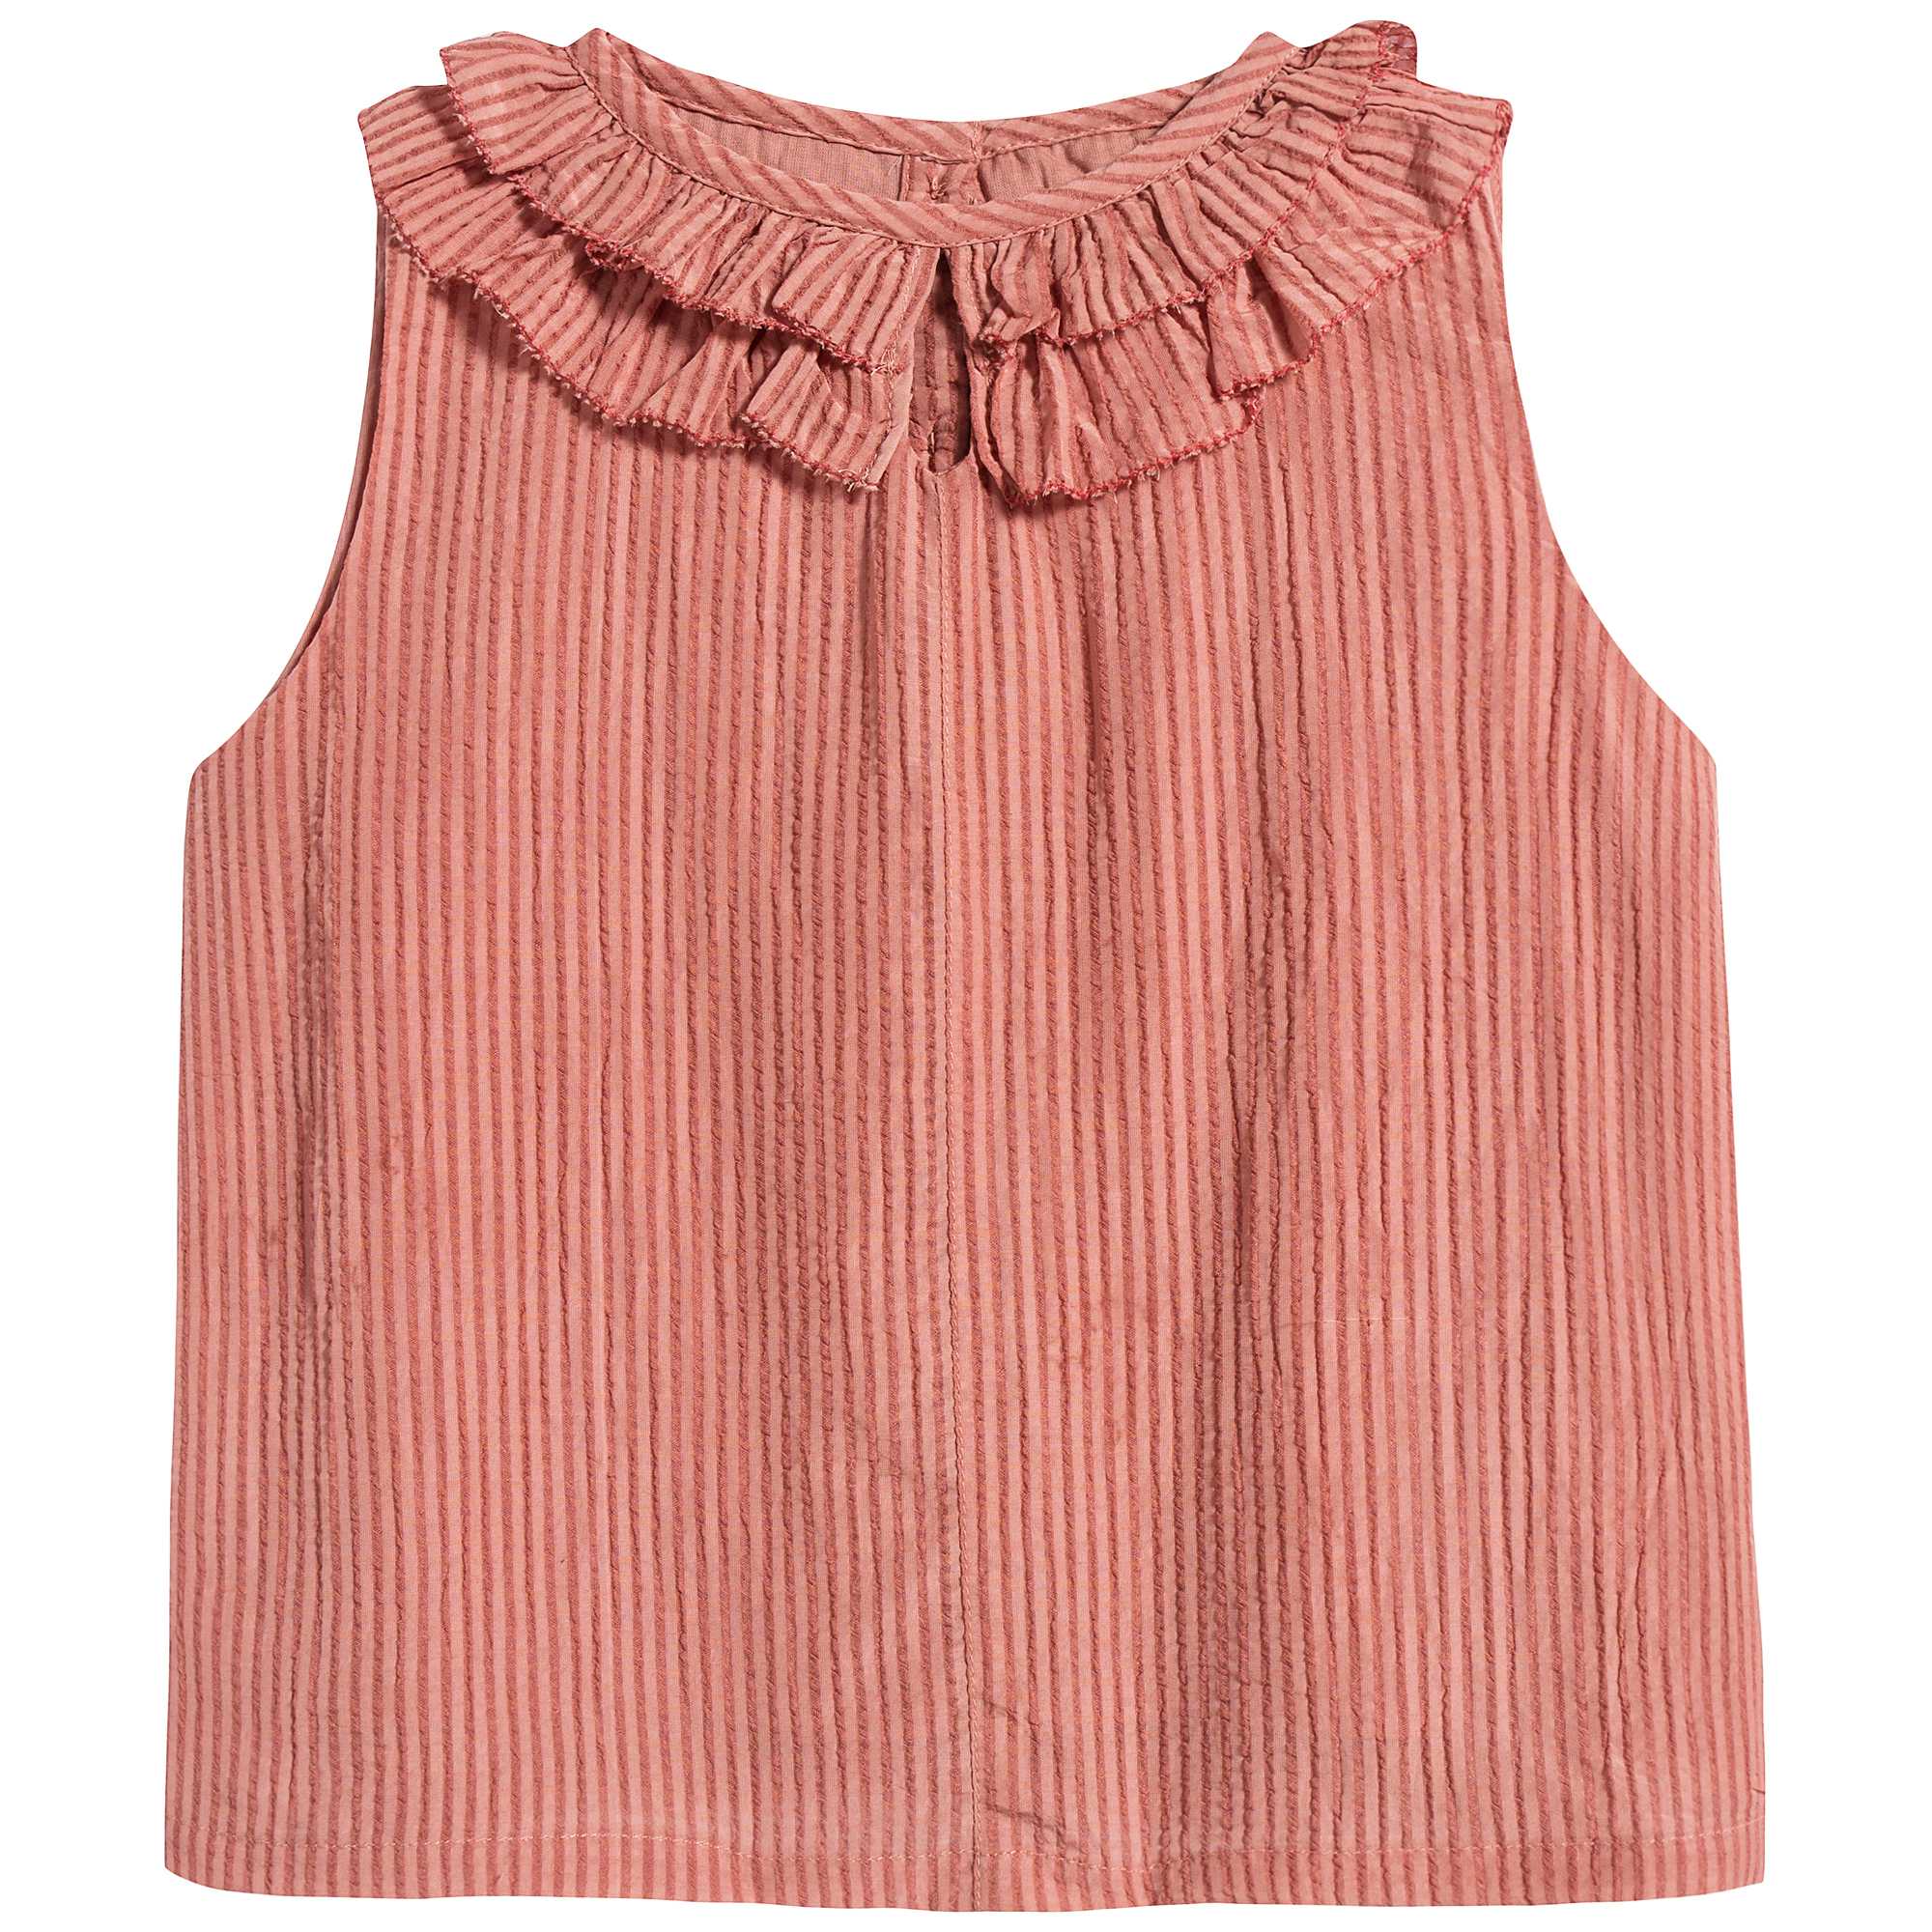 Girls Clay Top